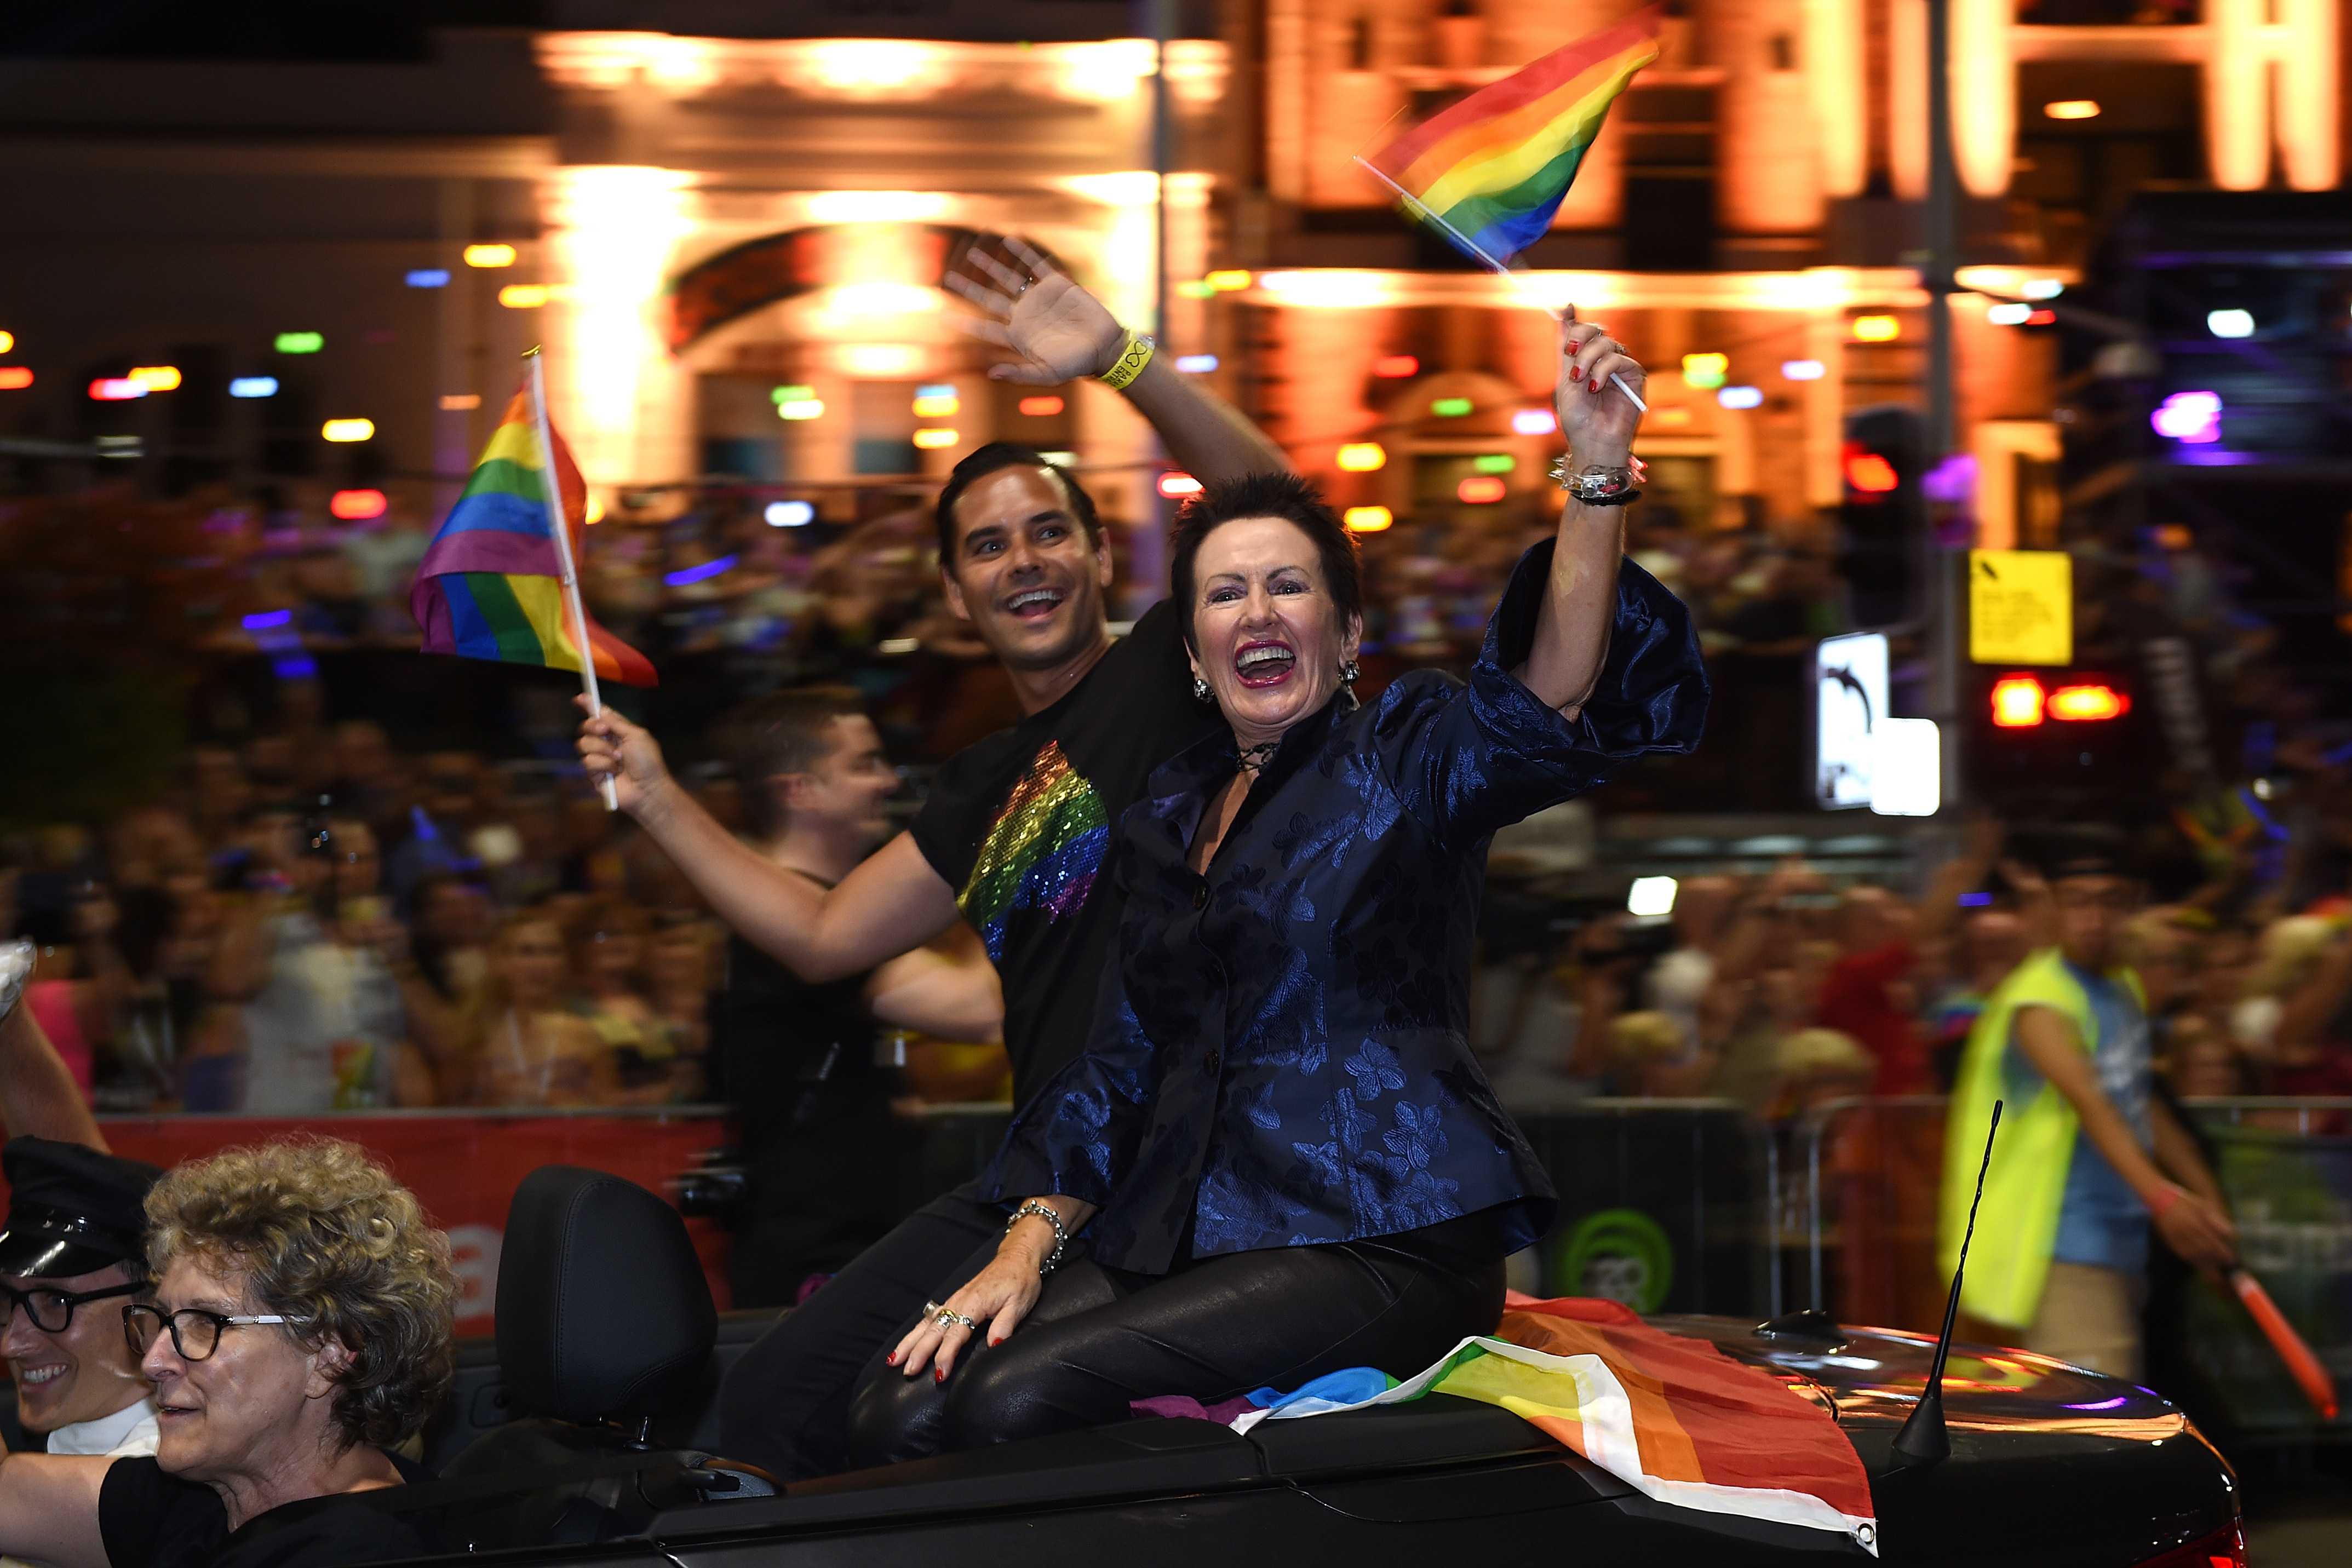 Sydney MP Alex Greenwich and Sydney Lord Mayor Clover Moore take part in the 38th annual Gay and Lesbian Mardi Gras parade.